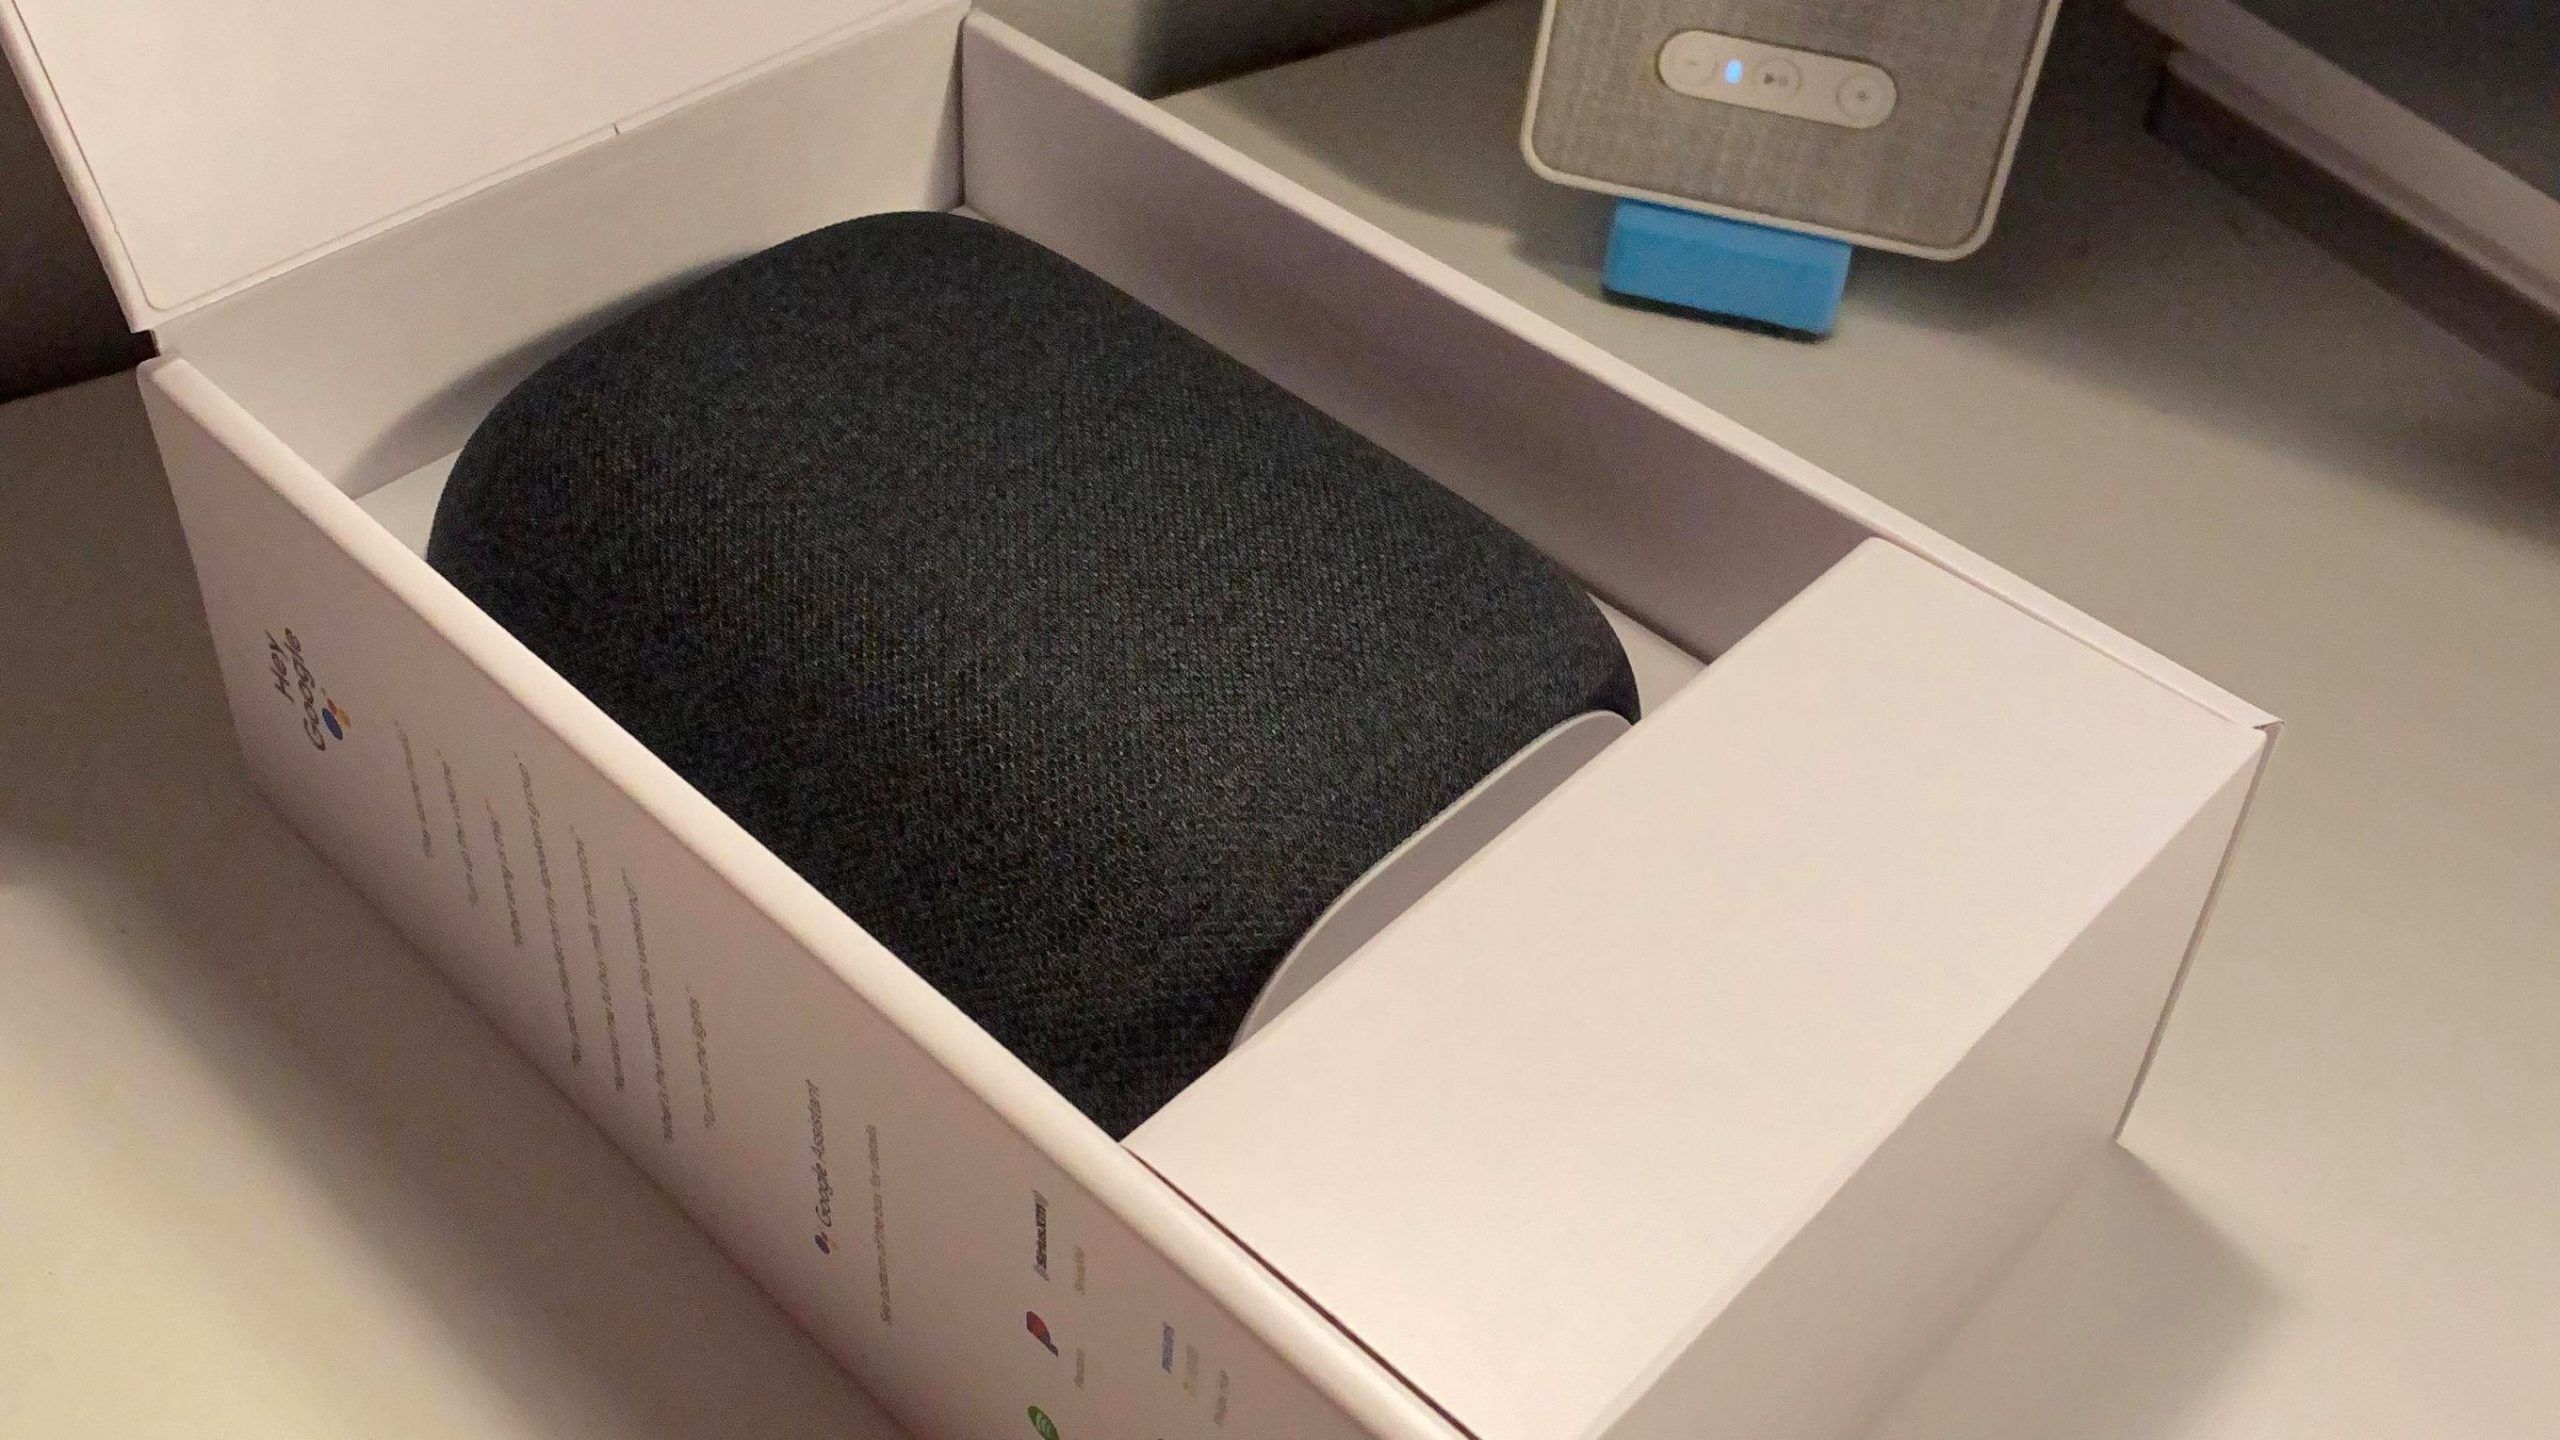 Google's upcoming Nest Audio speaker gets the early unboxing treatment